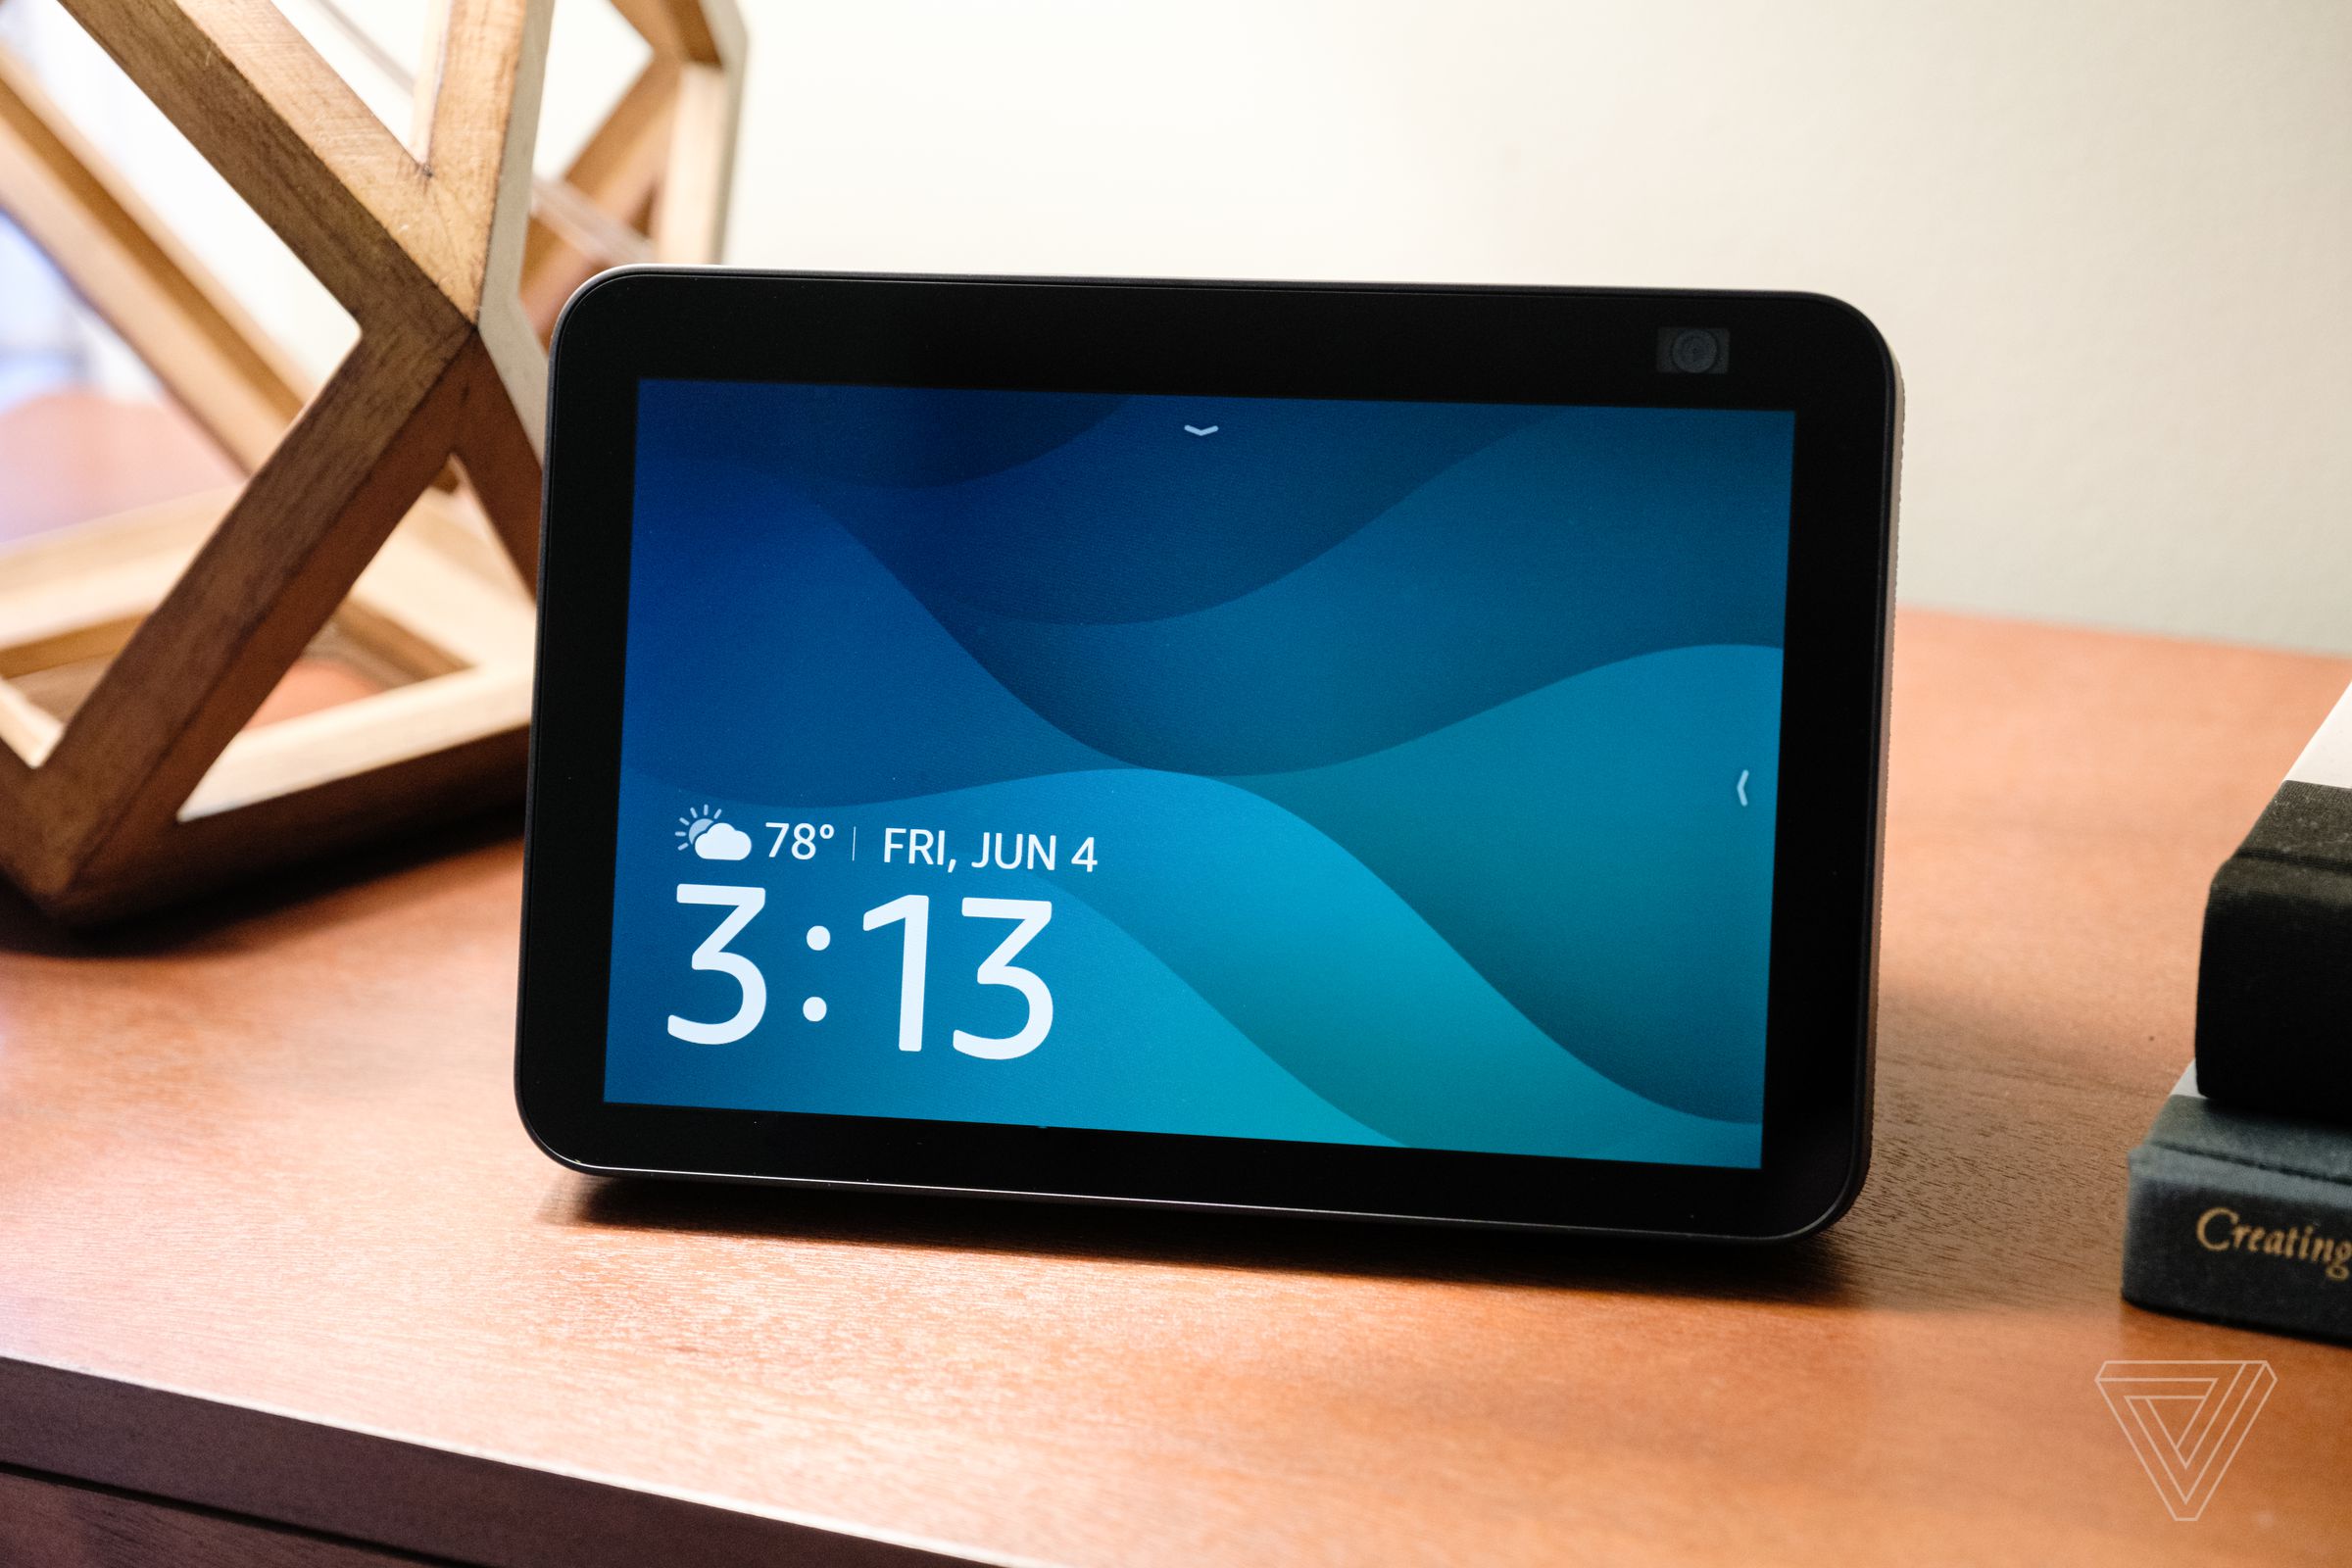 Amazon’s second-gen Echo Show 8 looks nearly identical to its predecessor save for the larger camera